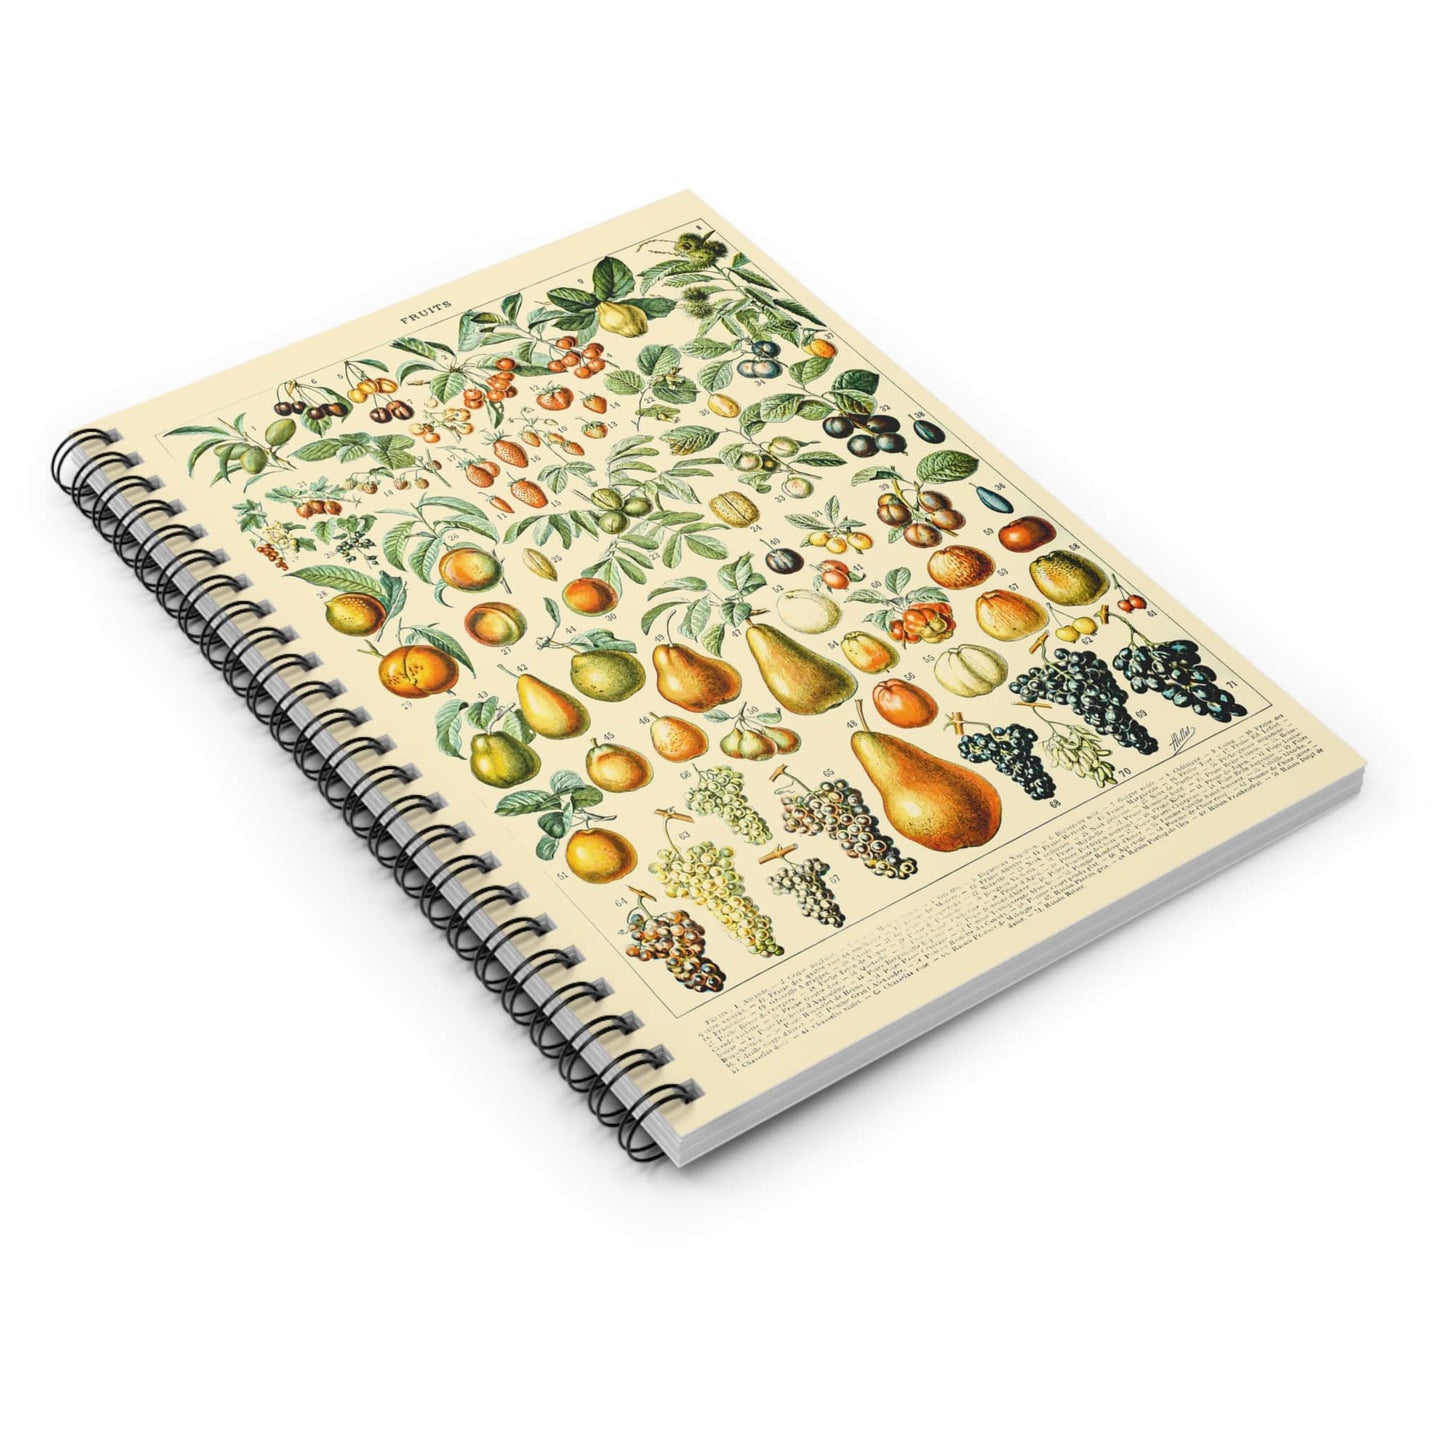 All Sorts of Fruits Spiral Notebook Laying Flat on White Surface